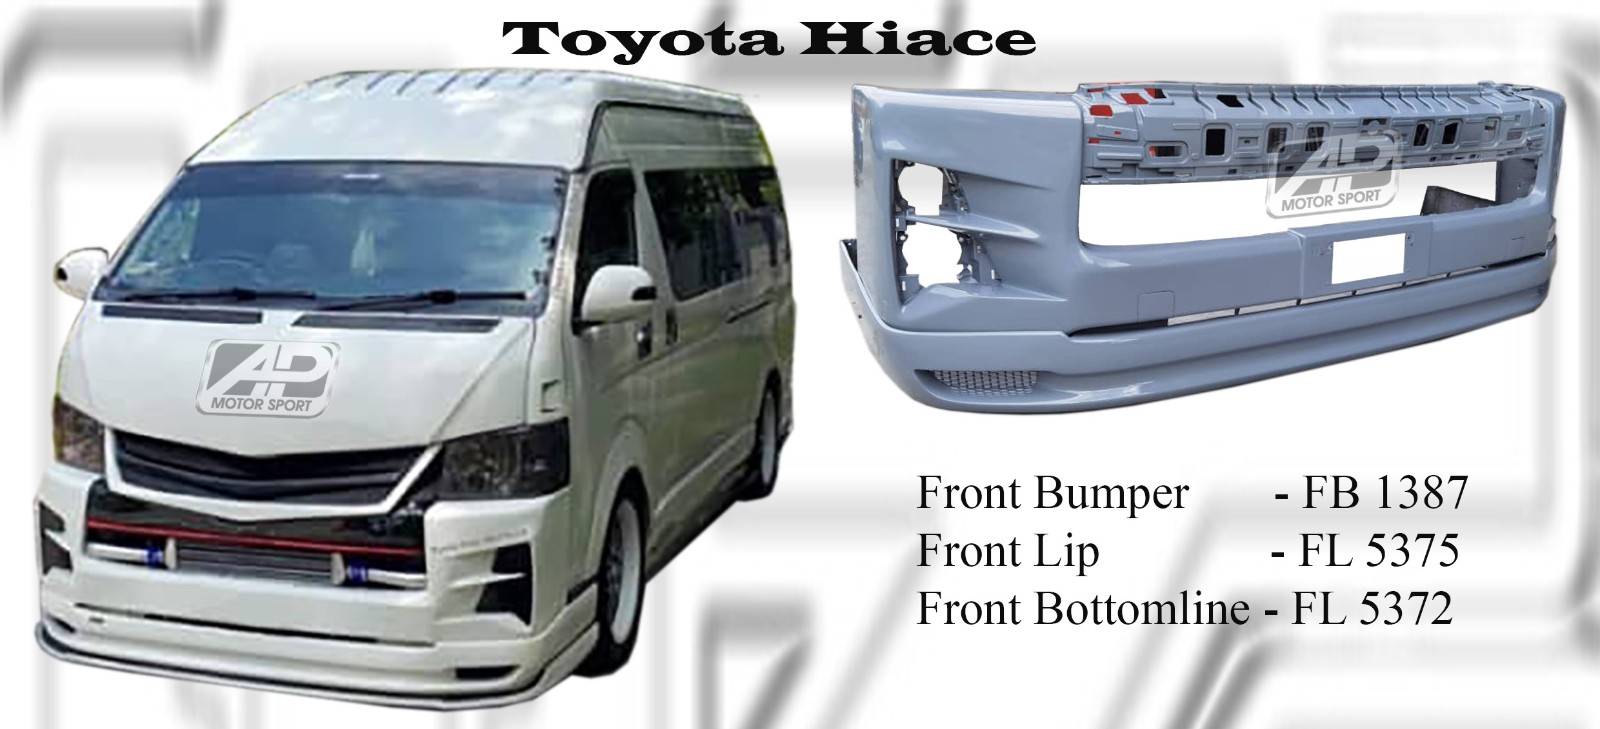 Toyota Hiace High Roof Front Bumper, Front Lip, Front Bottom